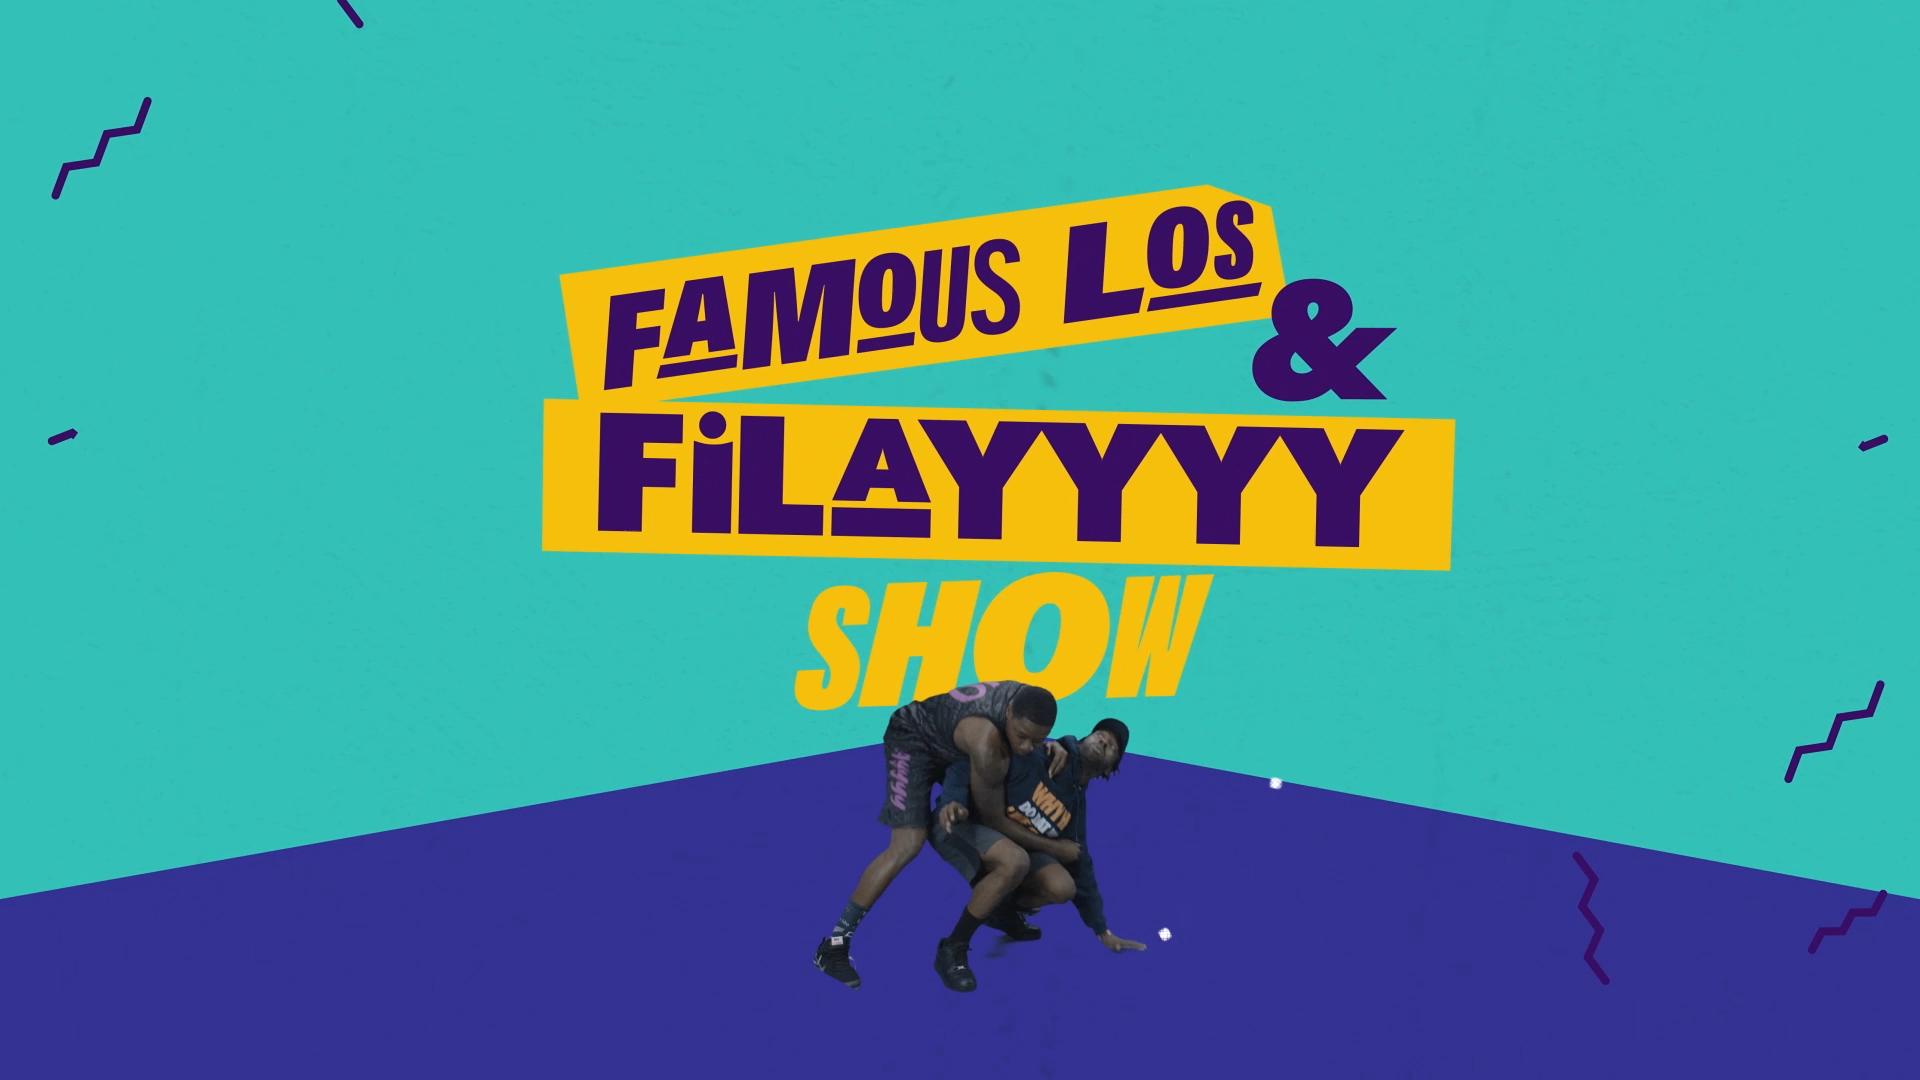 Famous Los & Filayyyy Show